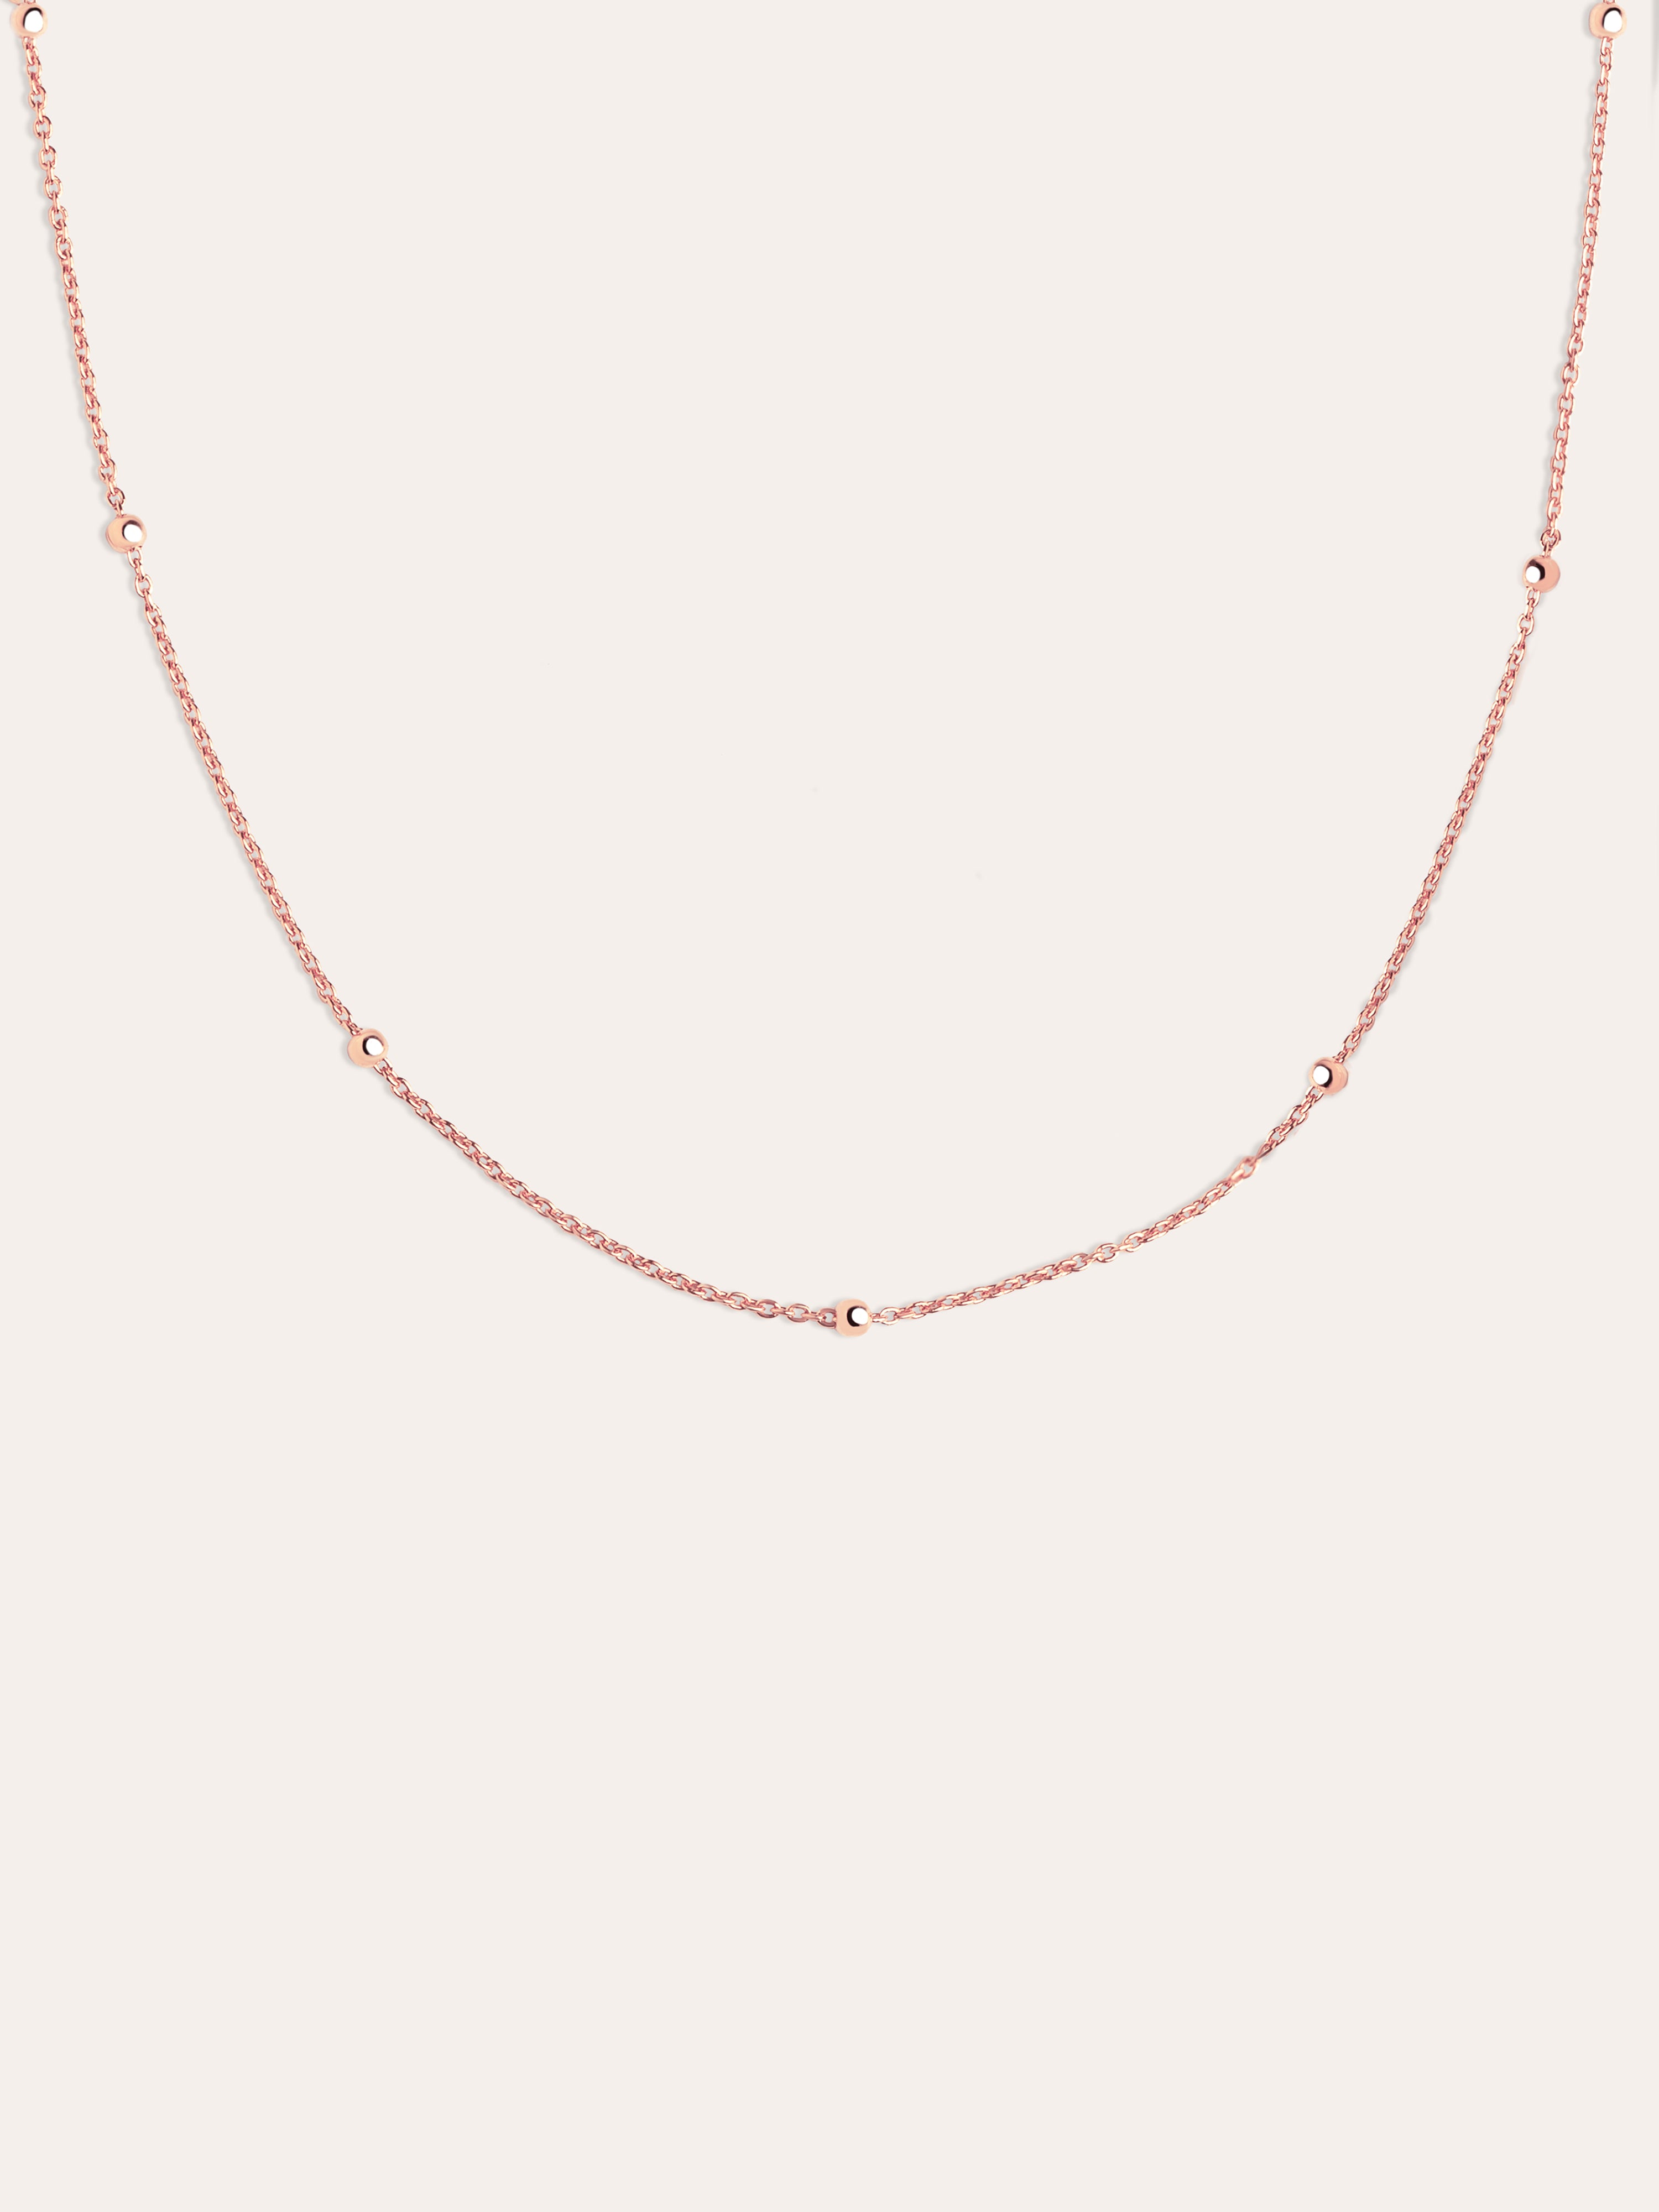 Dots Rose Gold Necklace